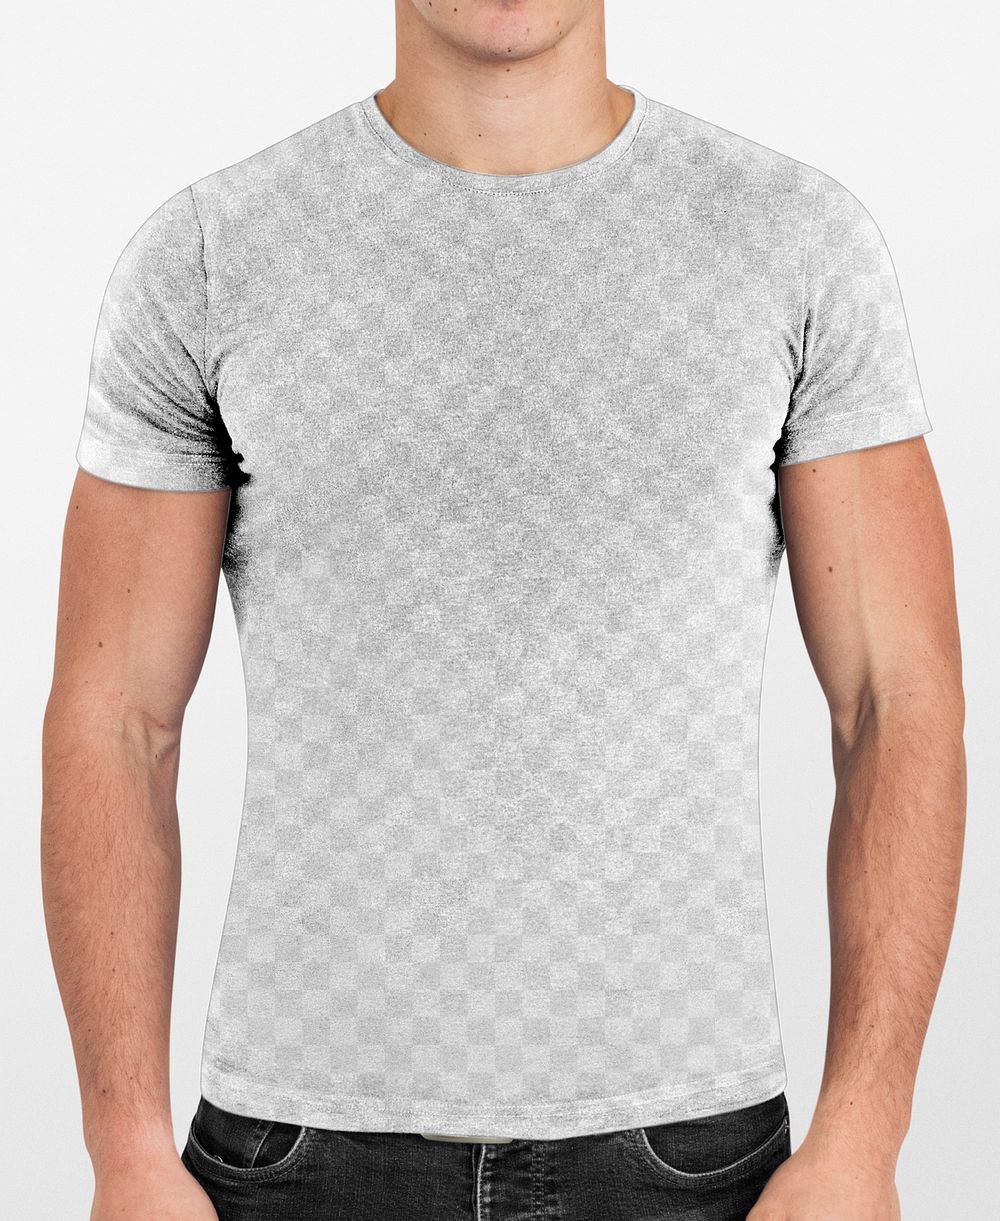 Simple t-shirt png transparent mockup worn by a man